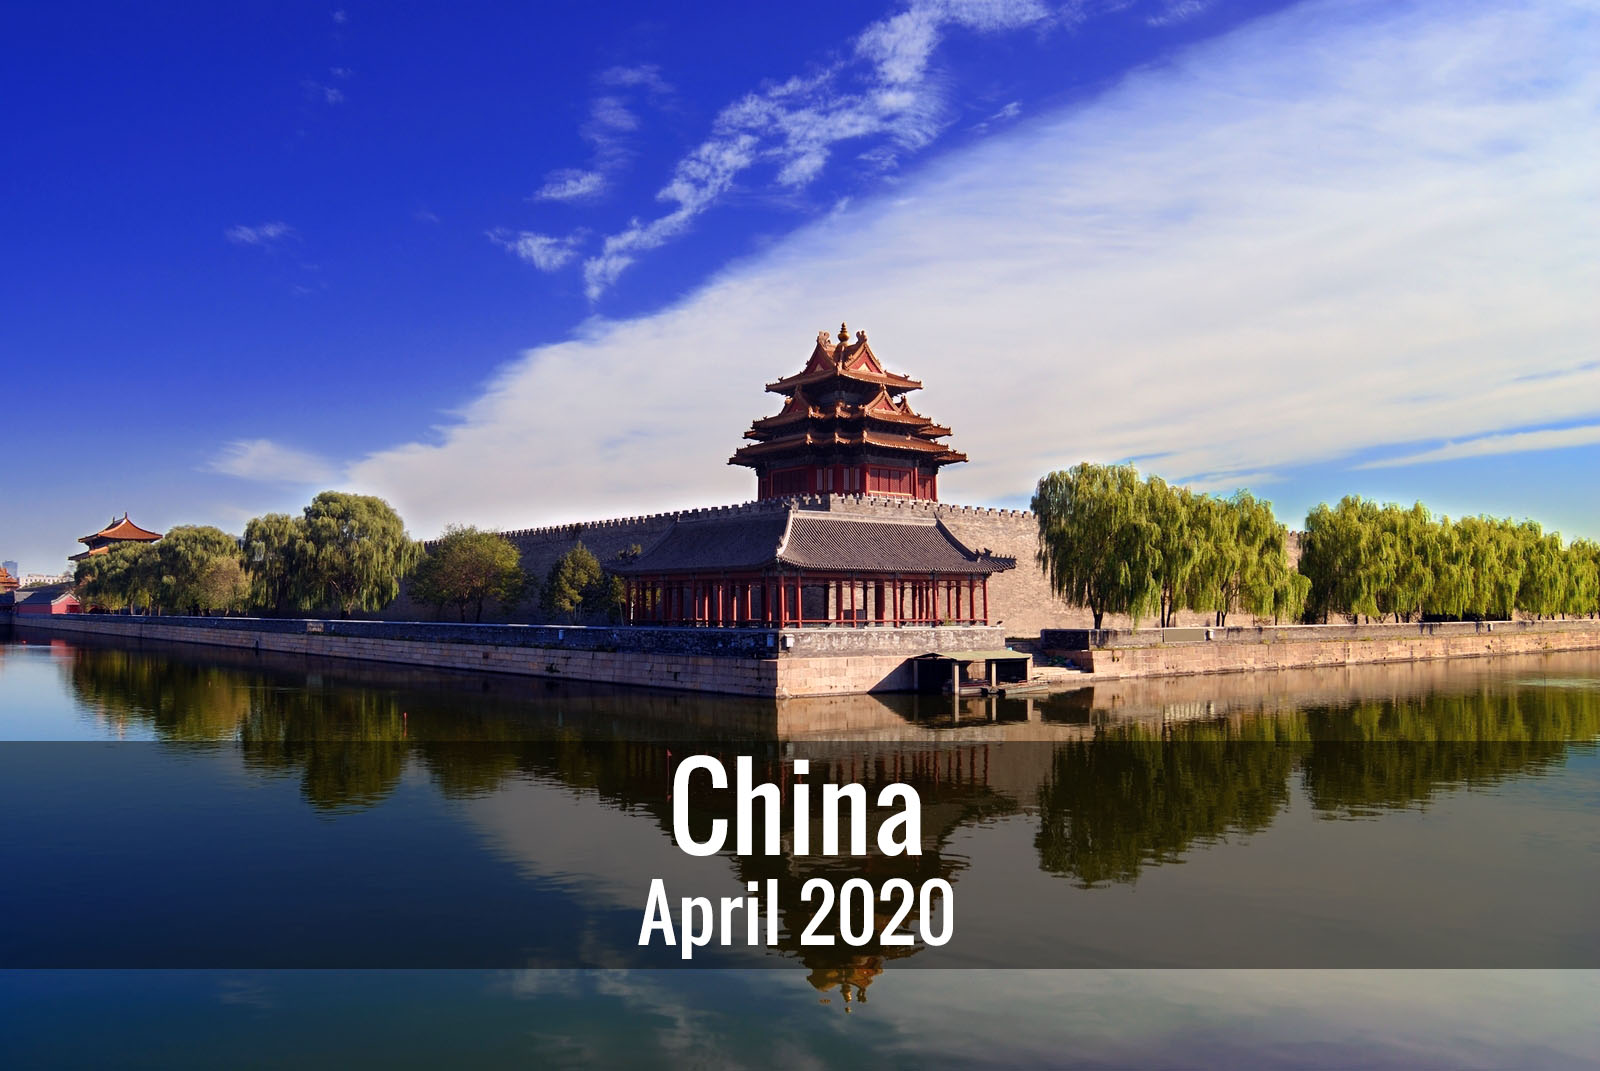 Livermore Valley Chamber of Commerce Trip to China, April 2020